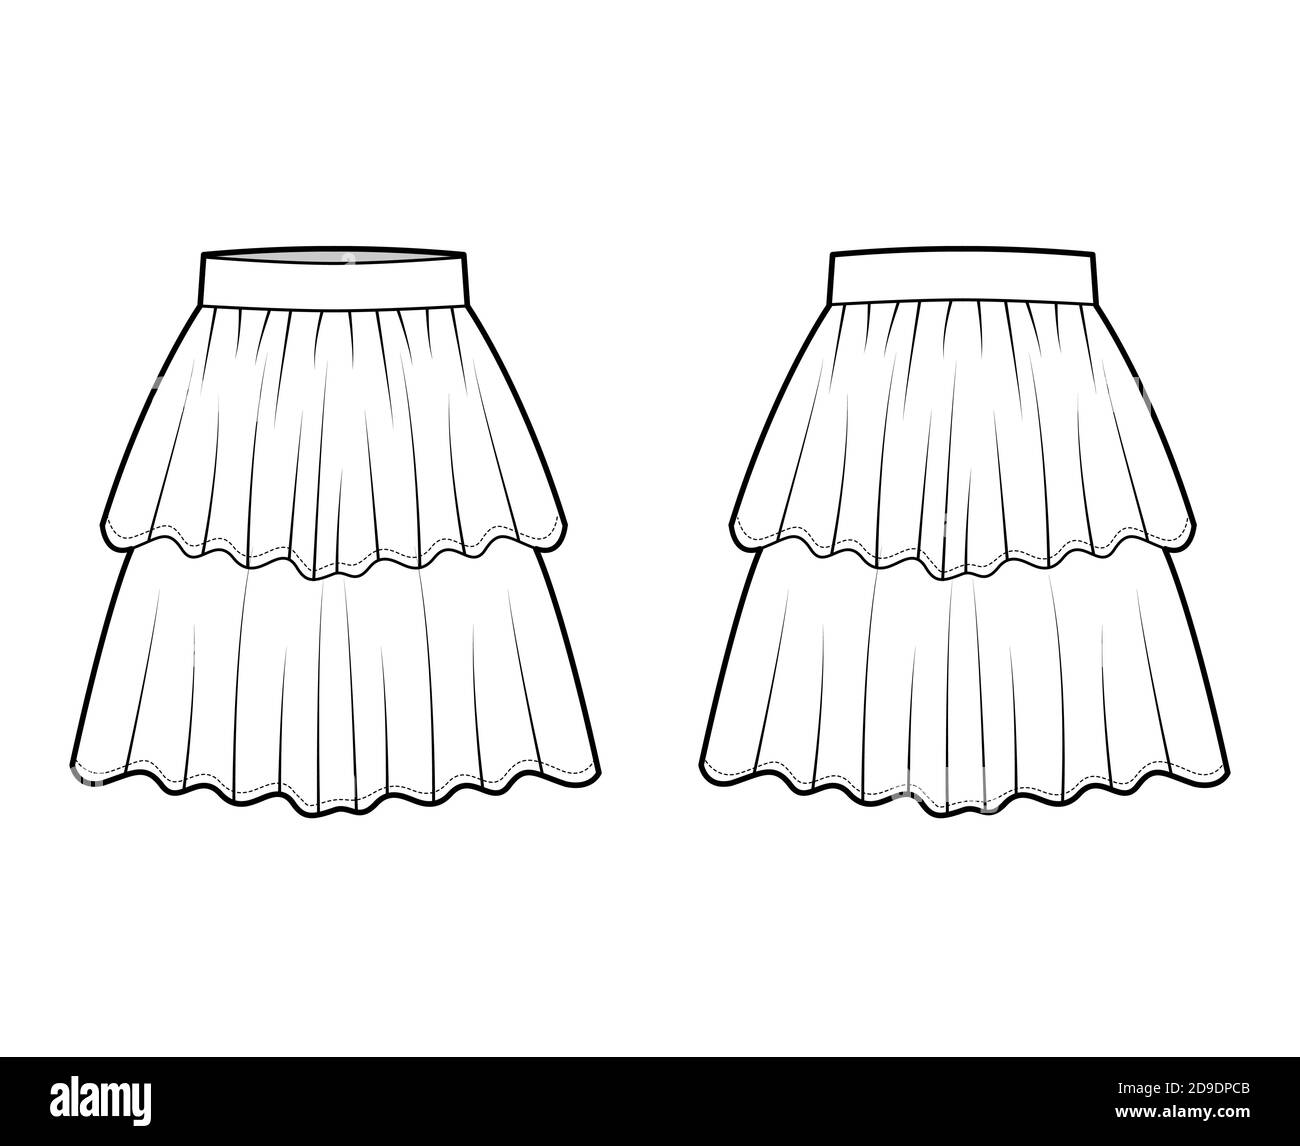 Skirt layered flounce technical fashion illustration with knee length ...